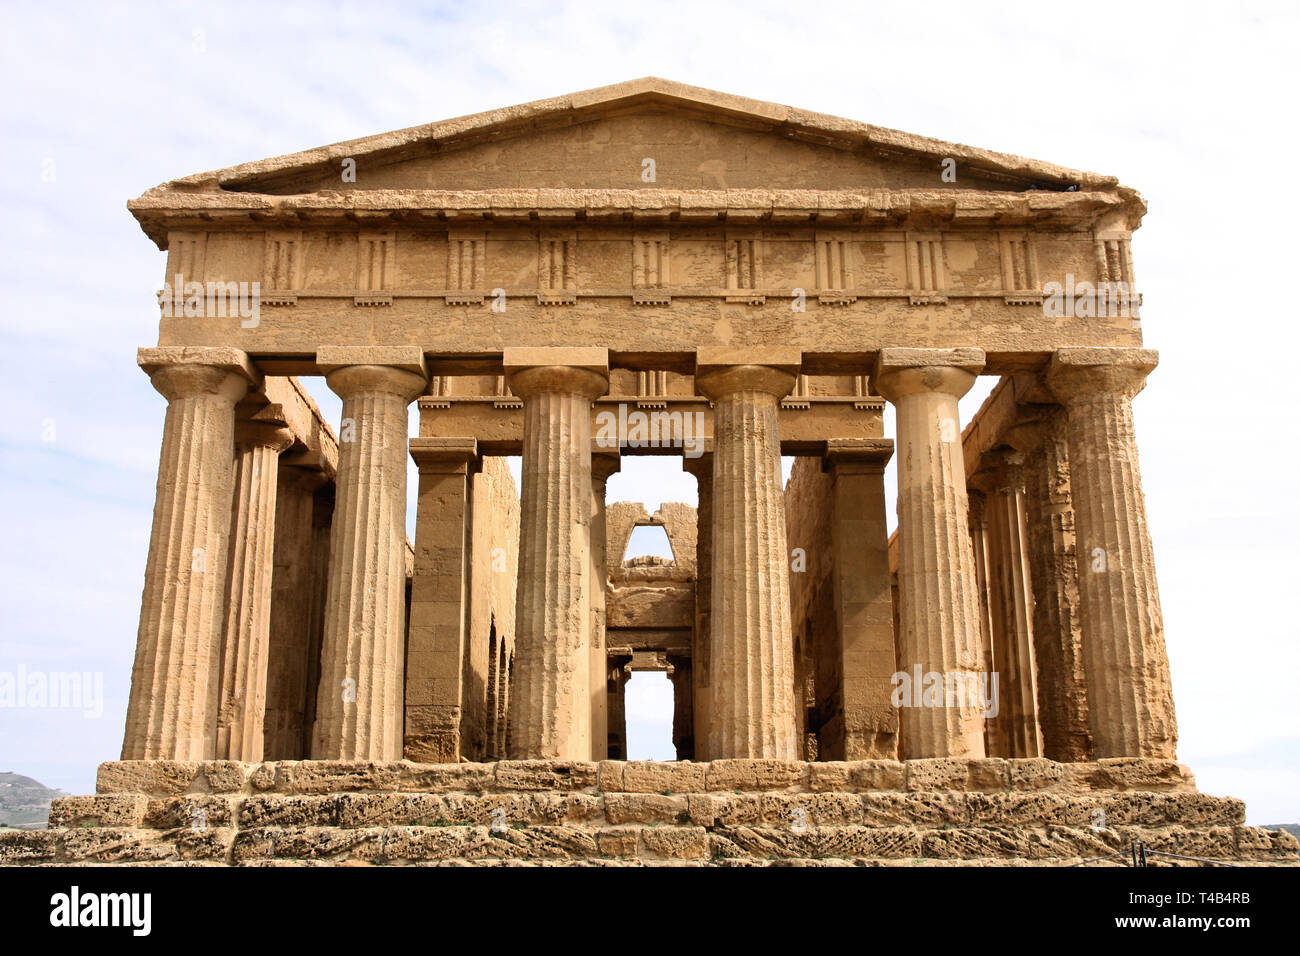 Agrigento, Sicily island in Italy. Famous Valle dei Templi, UNESCO World Heritage Site. Greek temple - remains of the Temple of Concordia. Stock Photo